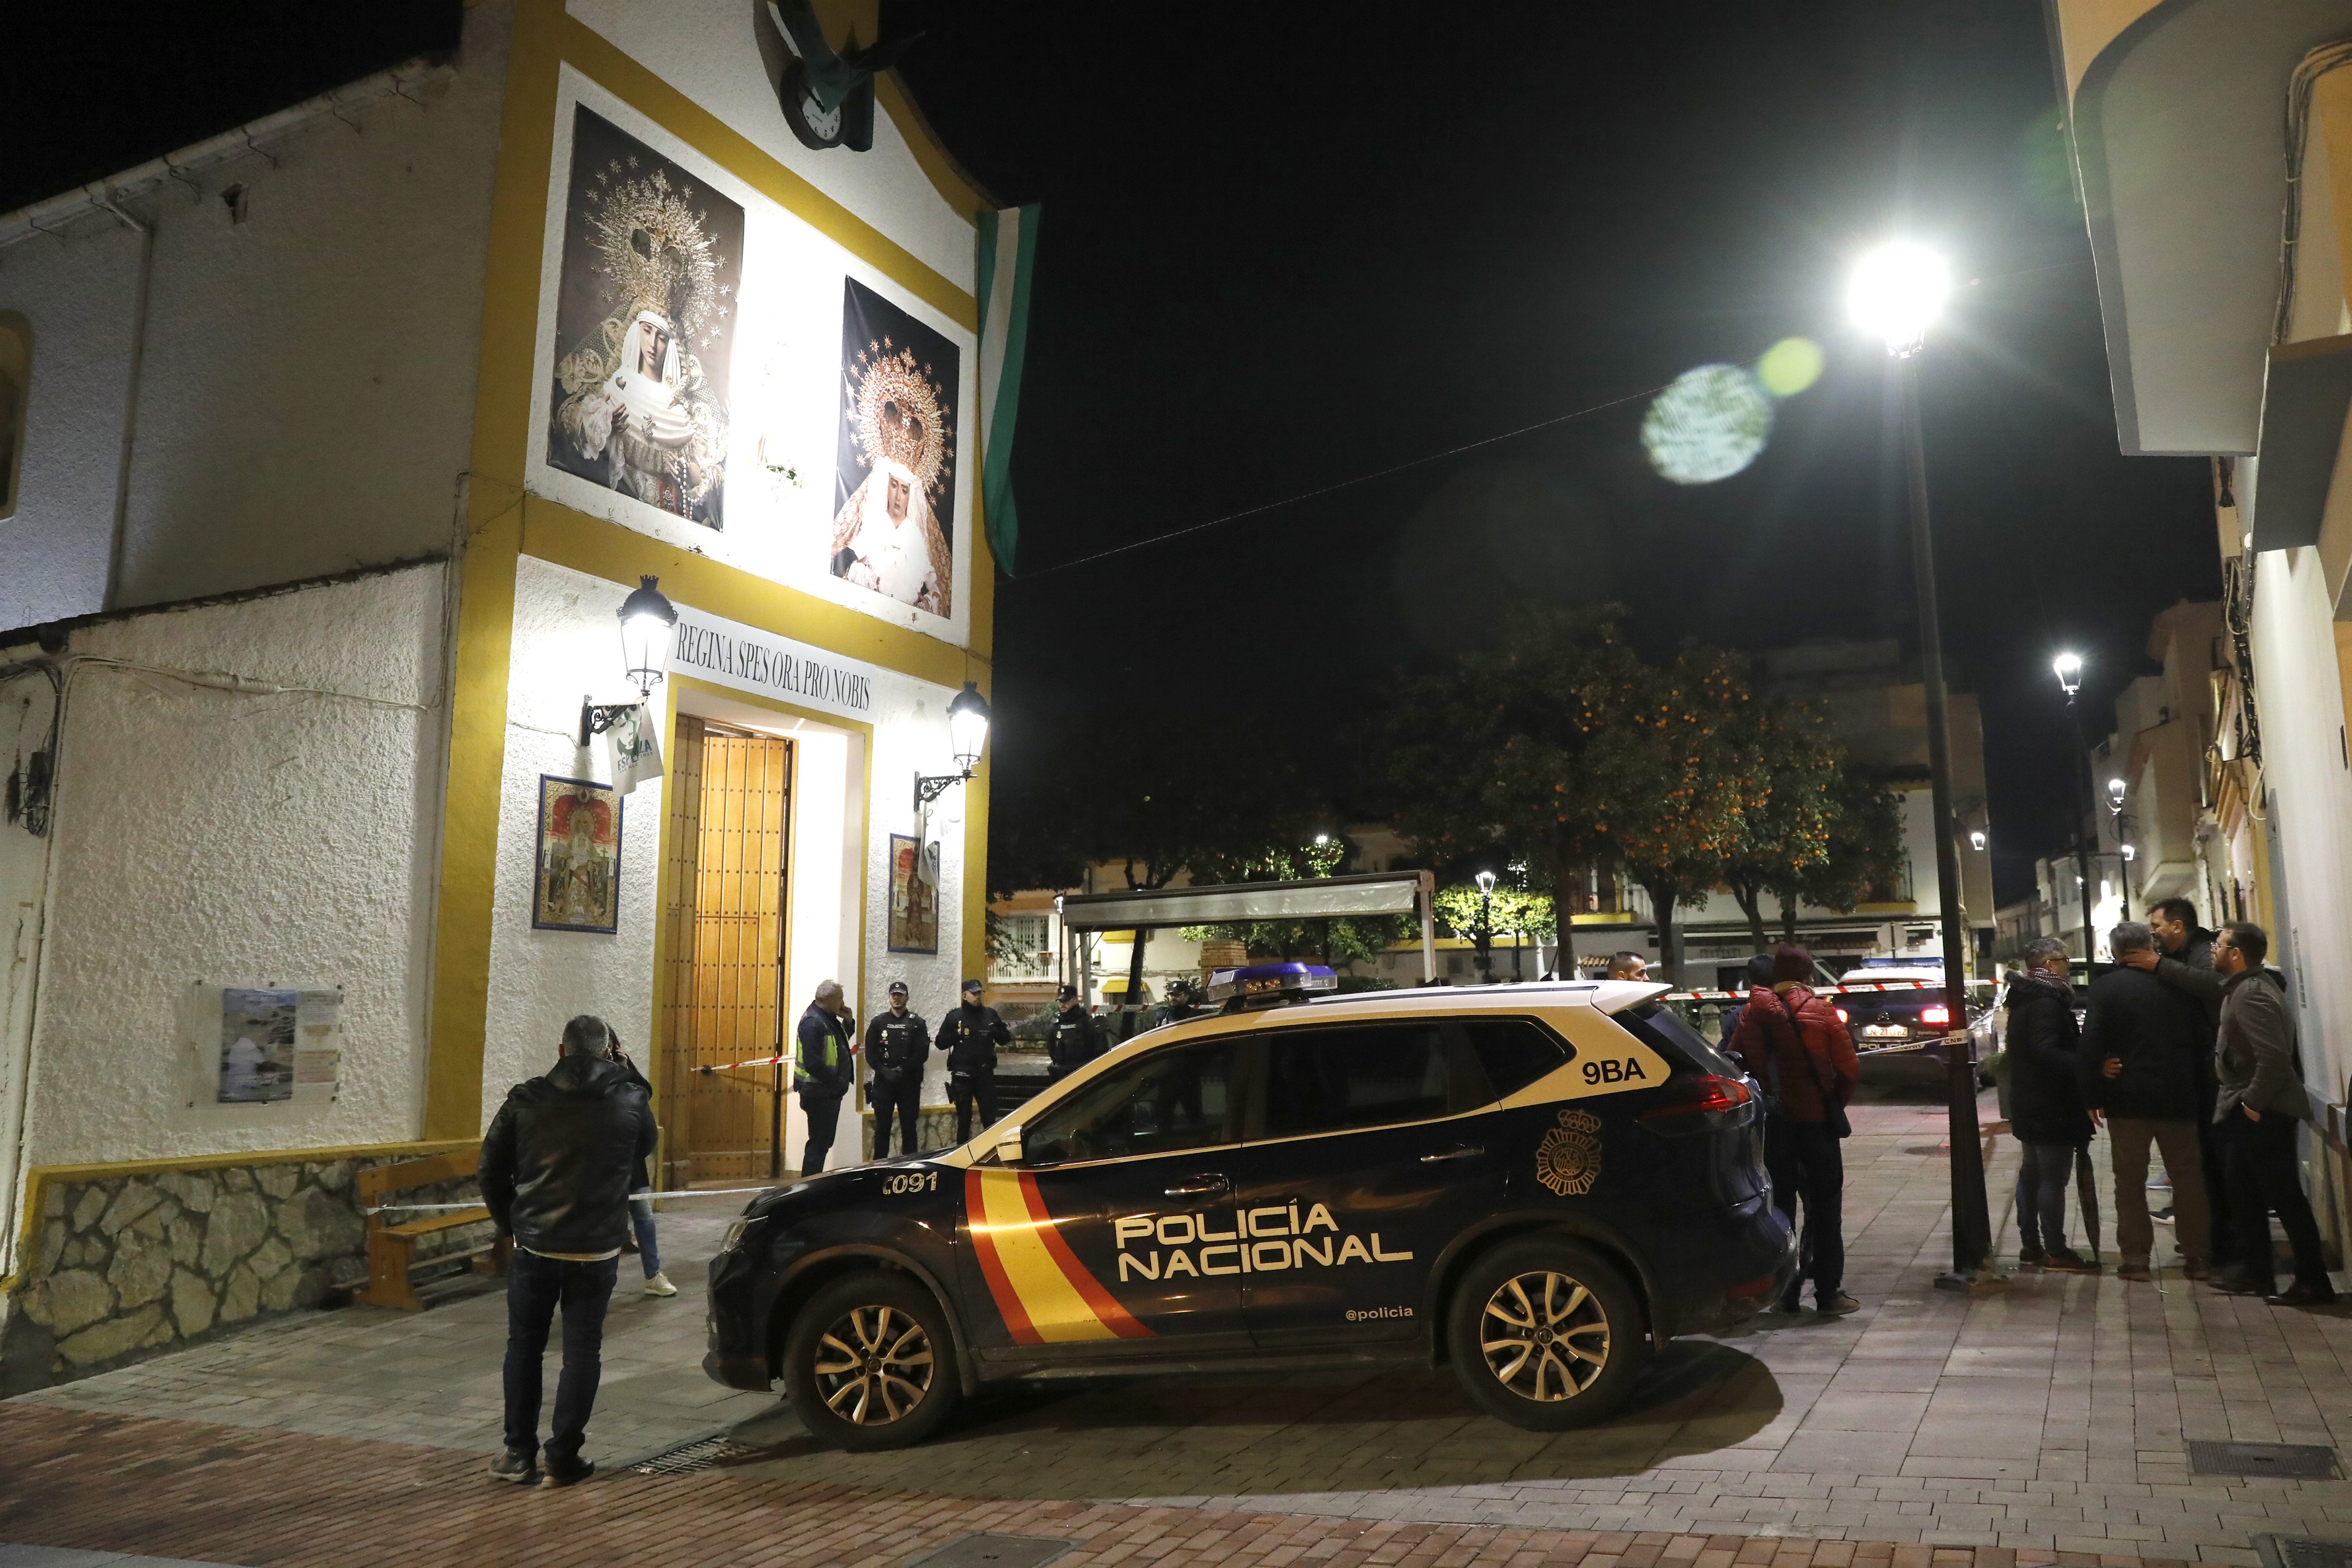 The exterior of the Parish of San Isidro, where the priest Antonio Rodríguez has been stabbed, who has been seriously injured and is admitted to the Punta de Europa hospital in stable condition.